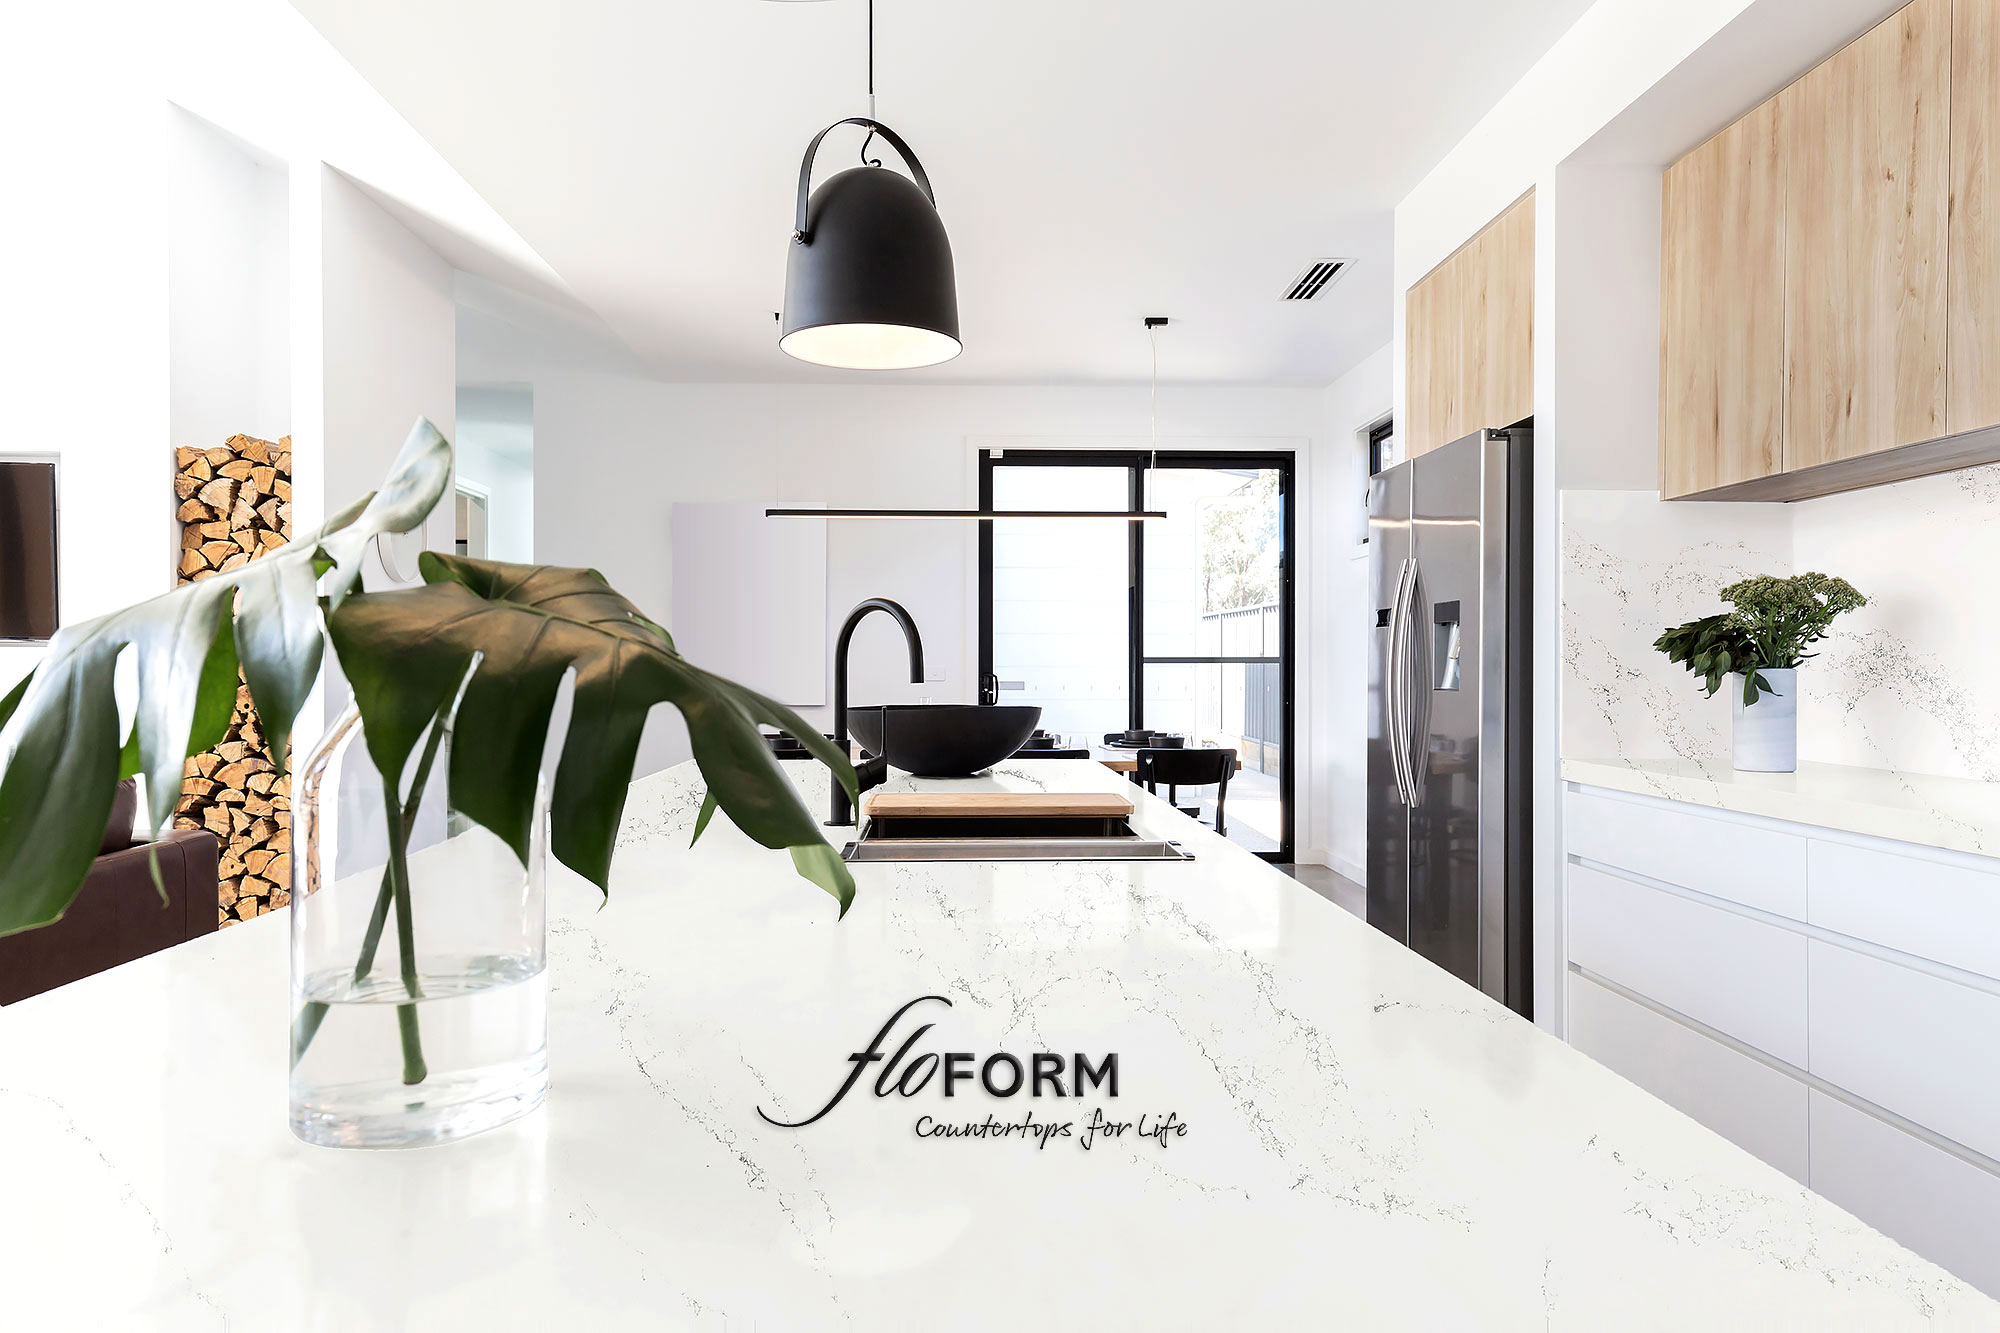 The Definitive Guide To Getting A New Countertop Floform Countertops